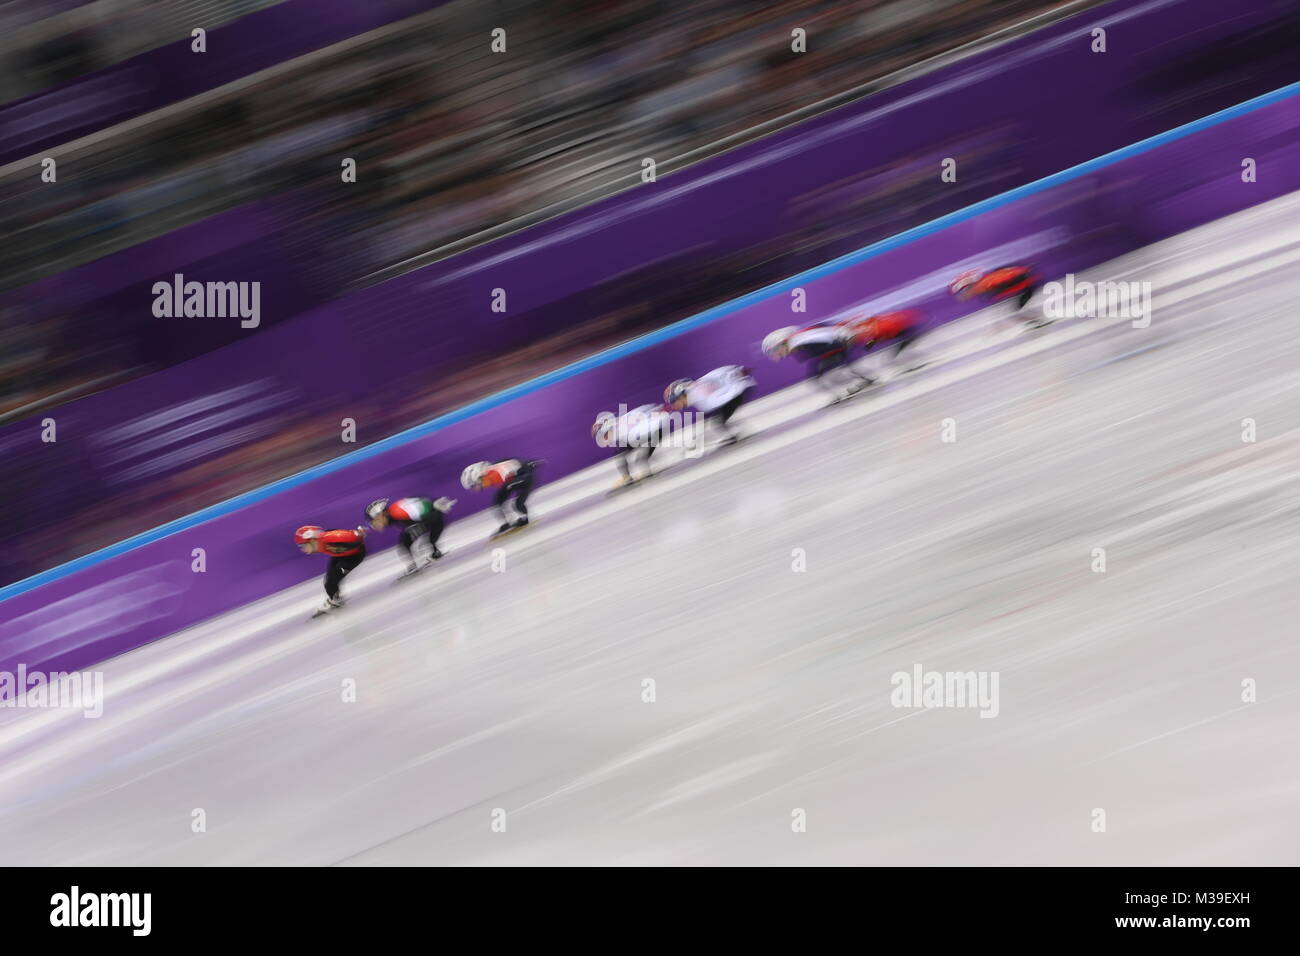 The Men's 1500m Short Track Final A during day one of the PyeongChang 2018 Winter Olympic Games in South Korea. Stock Photo